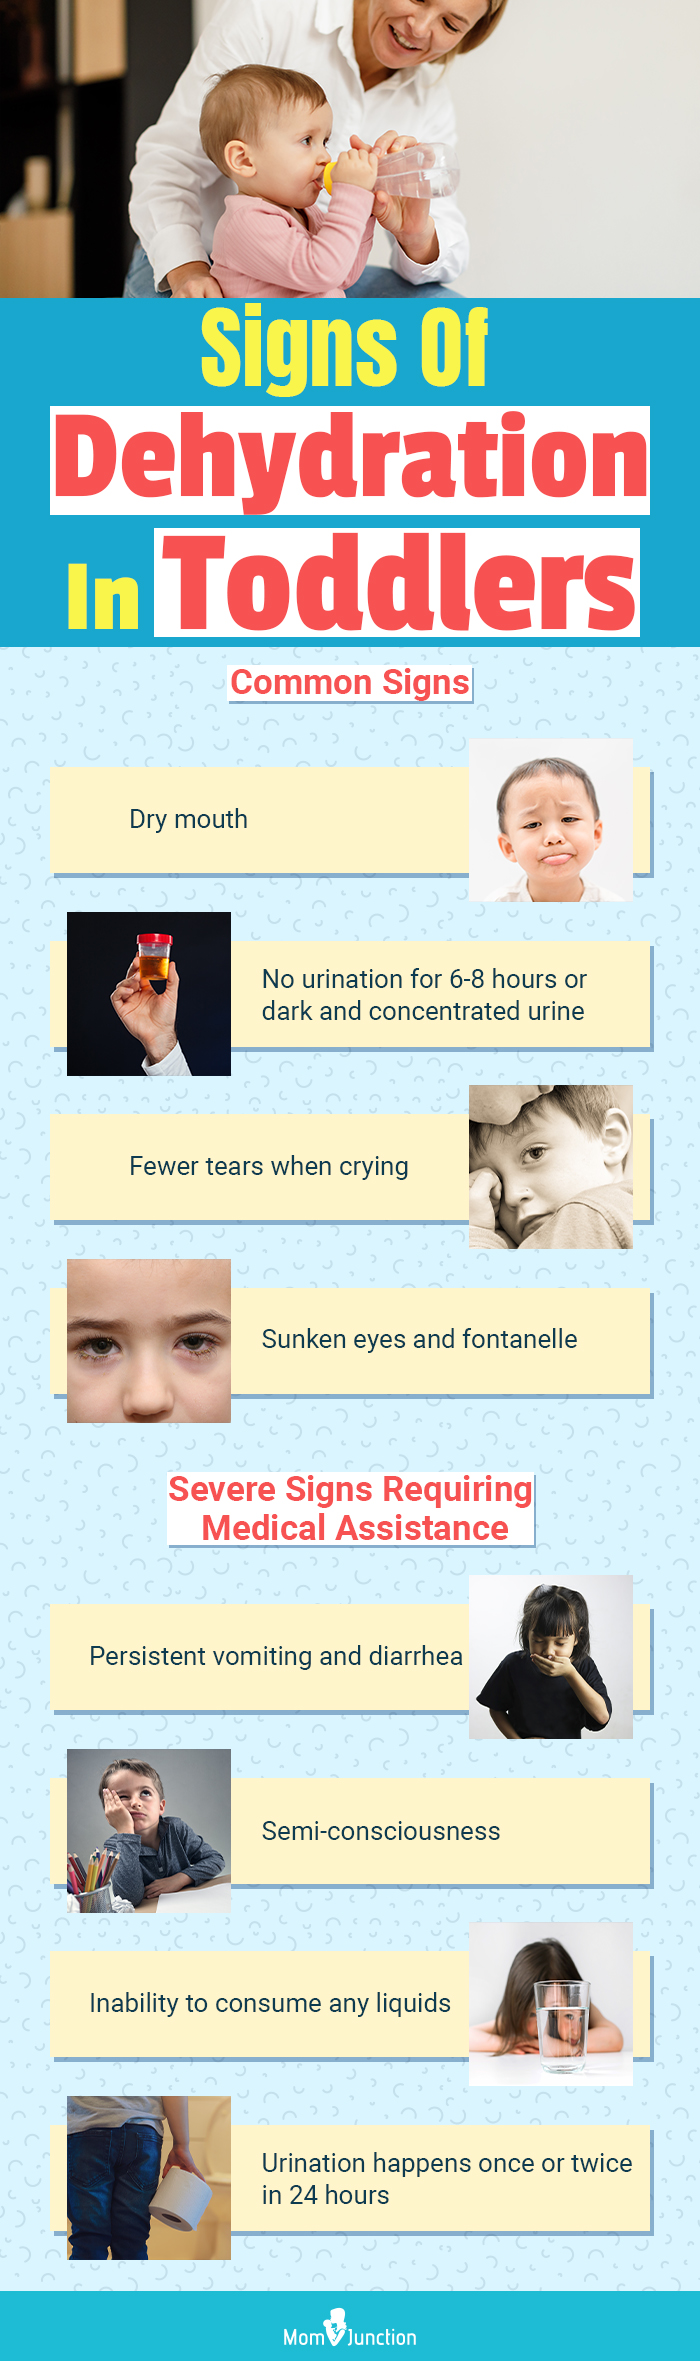 signs of dehydration in toddlers (infographic)